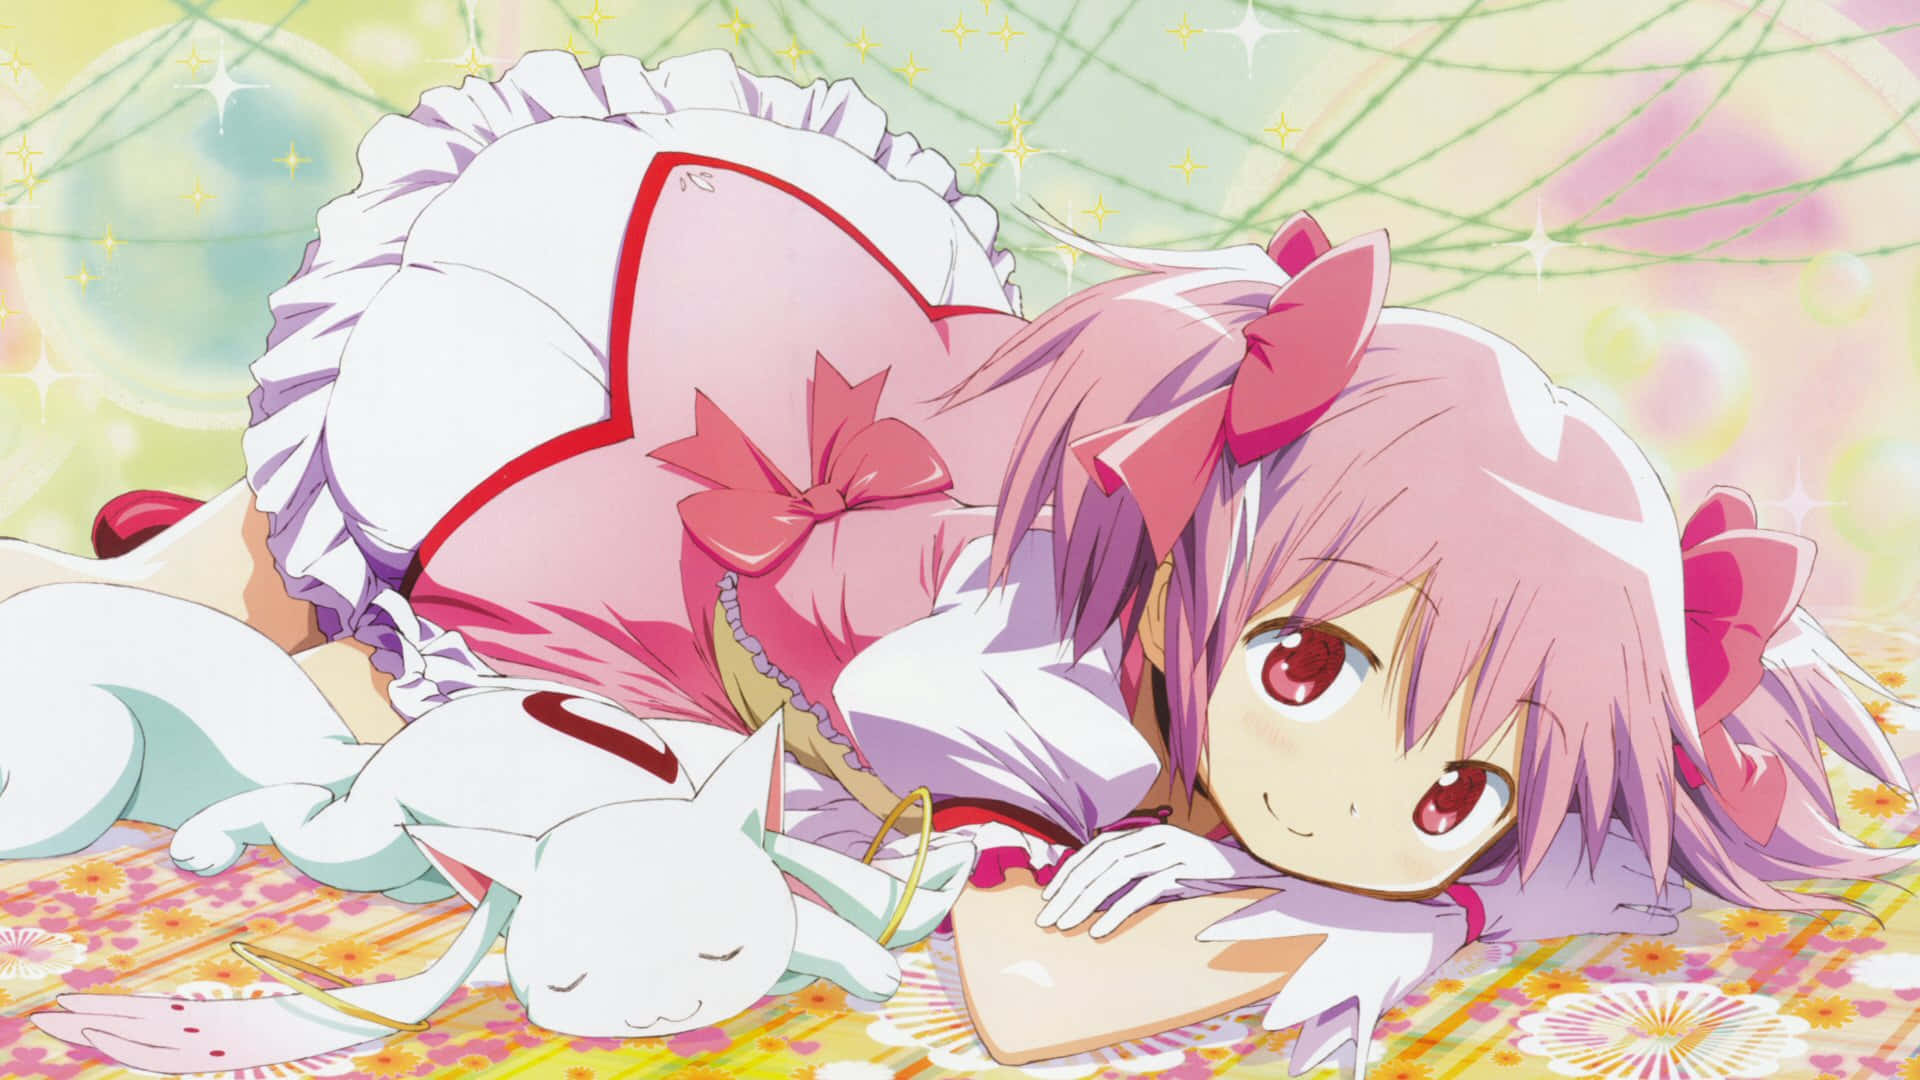 Madoka Magica: The Journey That Becomes a Myth